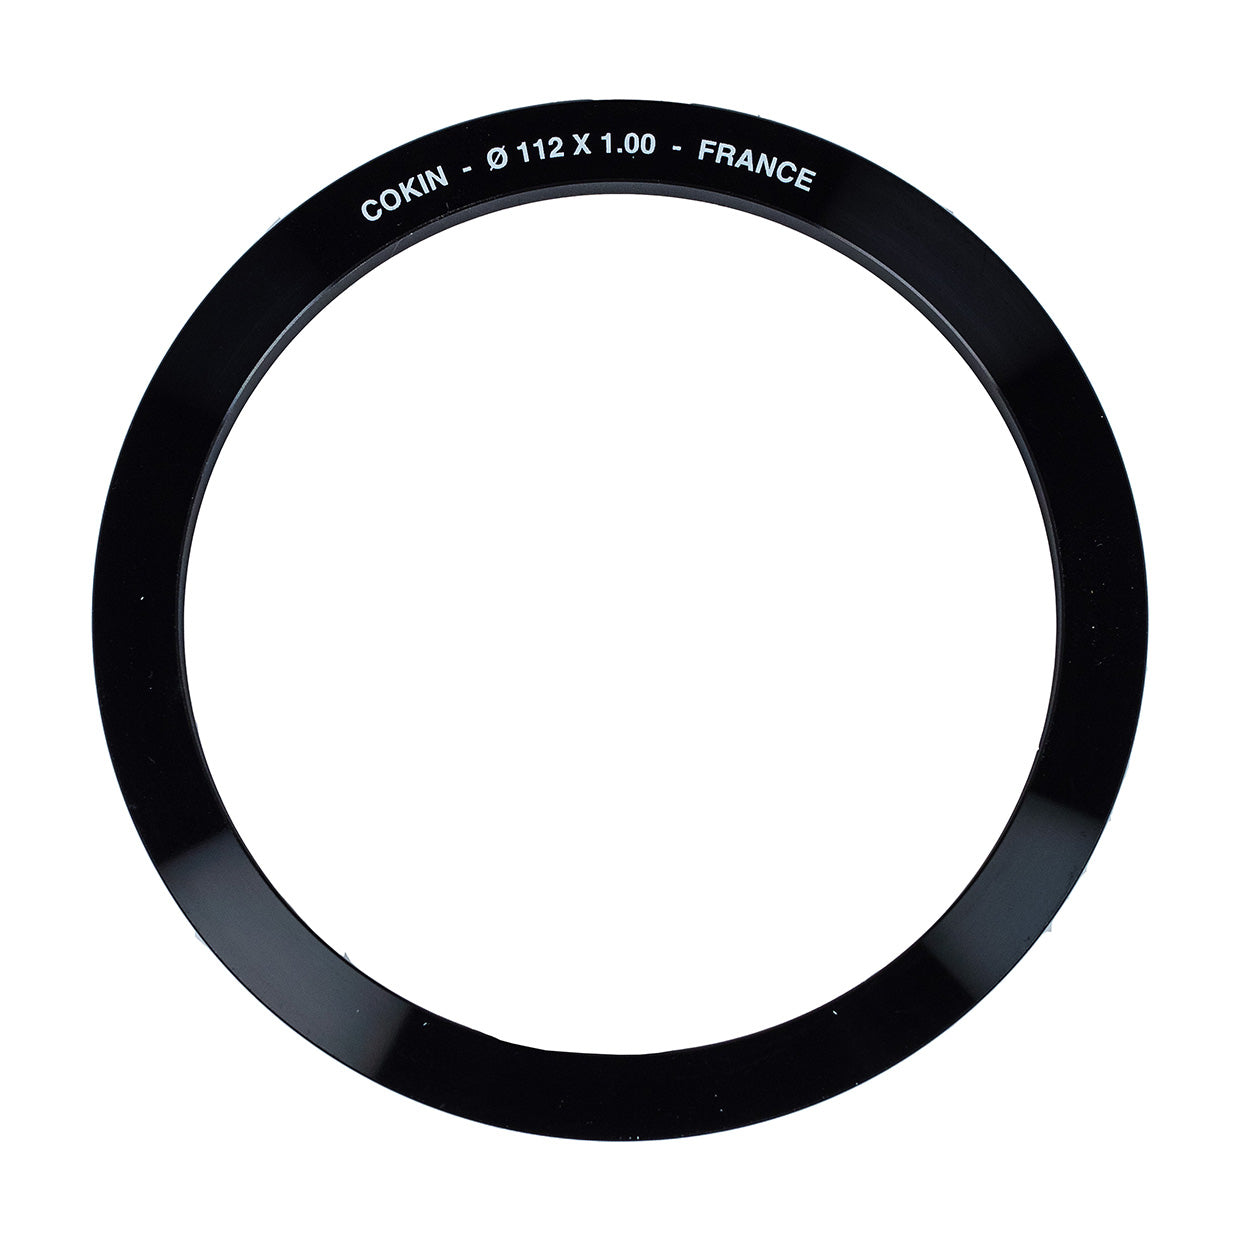 Adapter Ring for Filter Holders